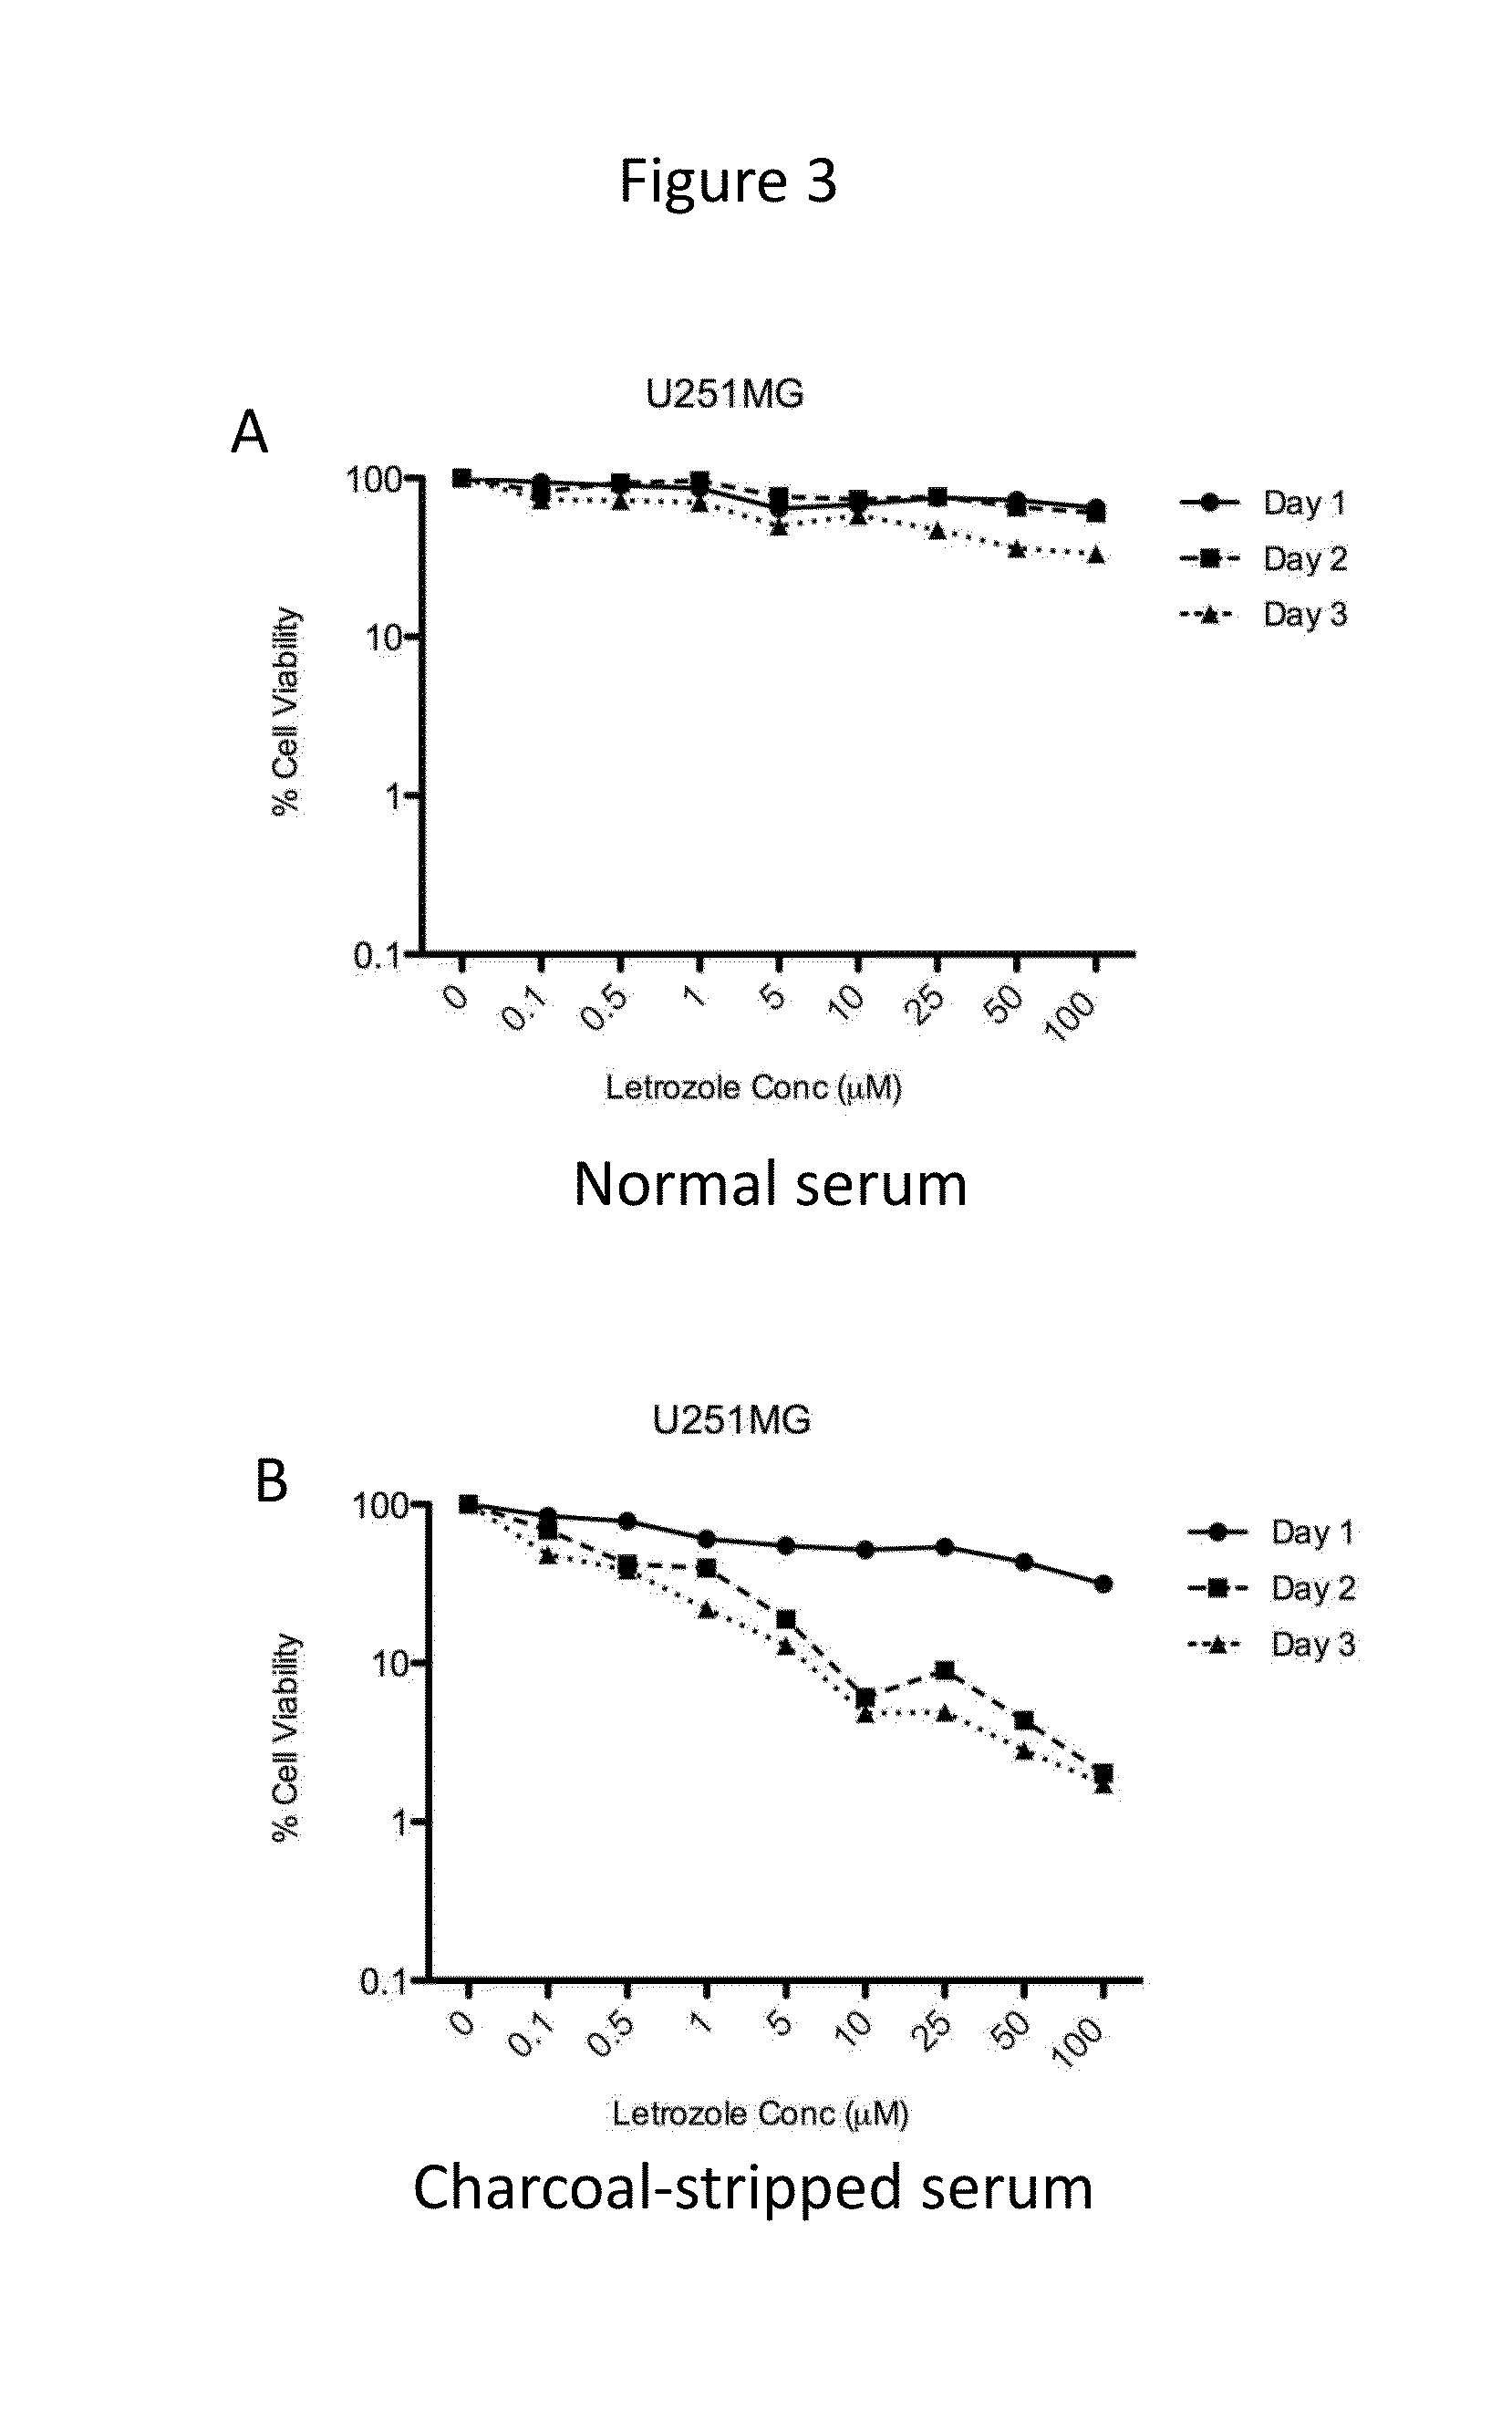 Methods of Treating Primary Brain Tumors by Administering Letrozole